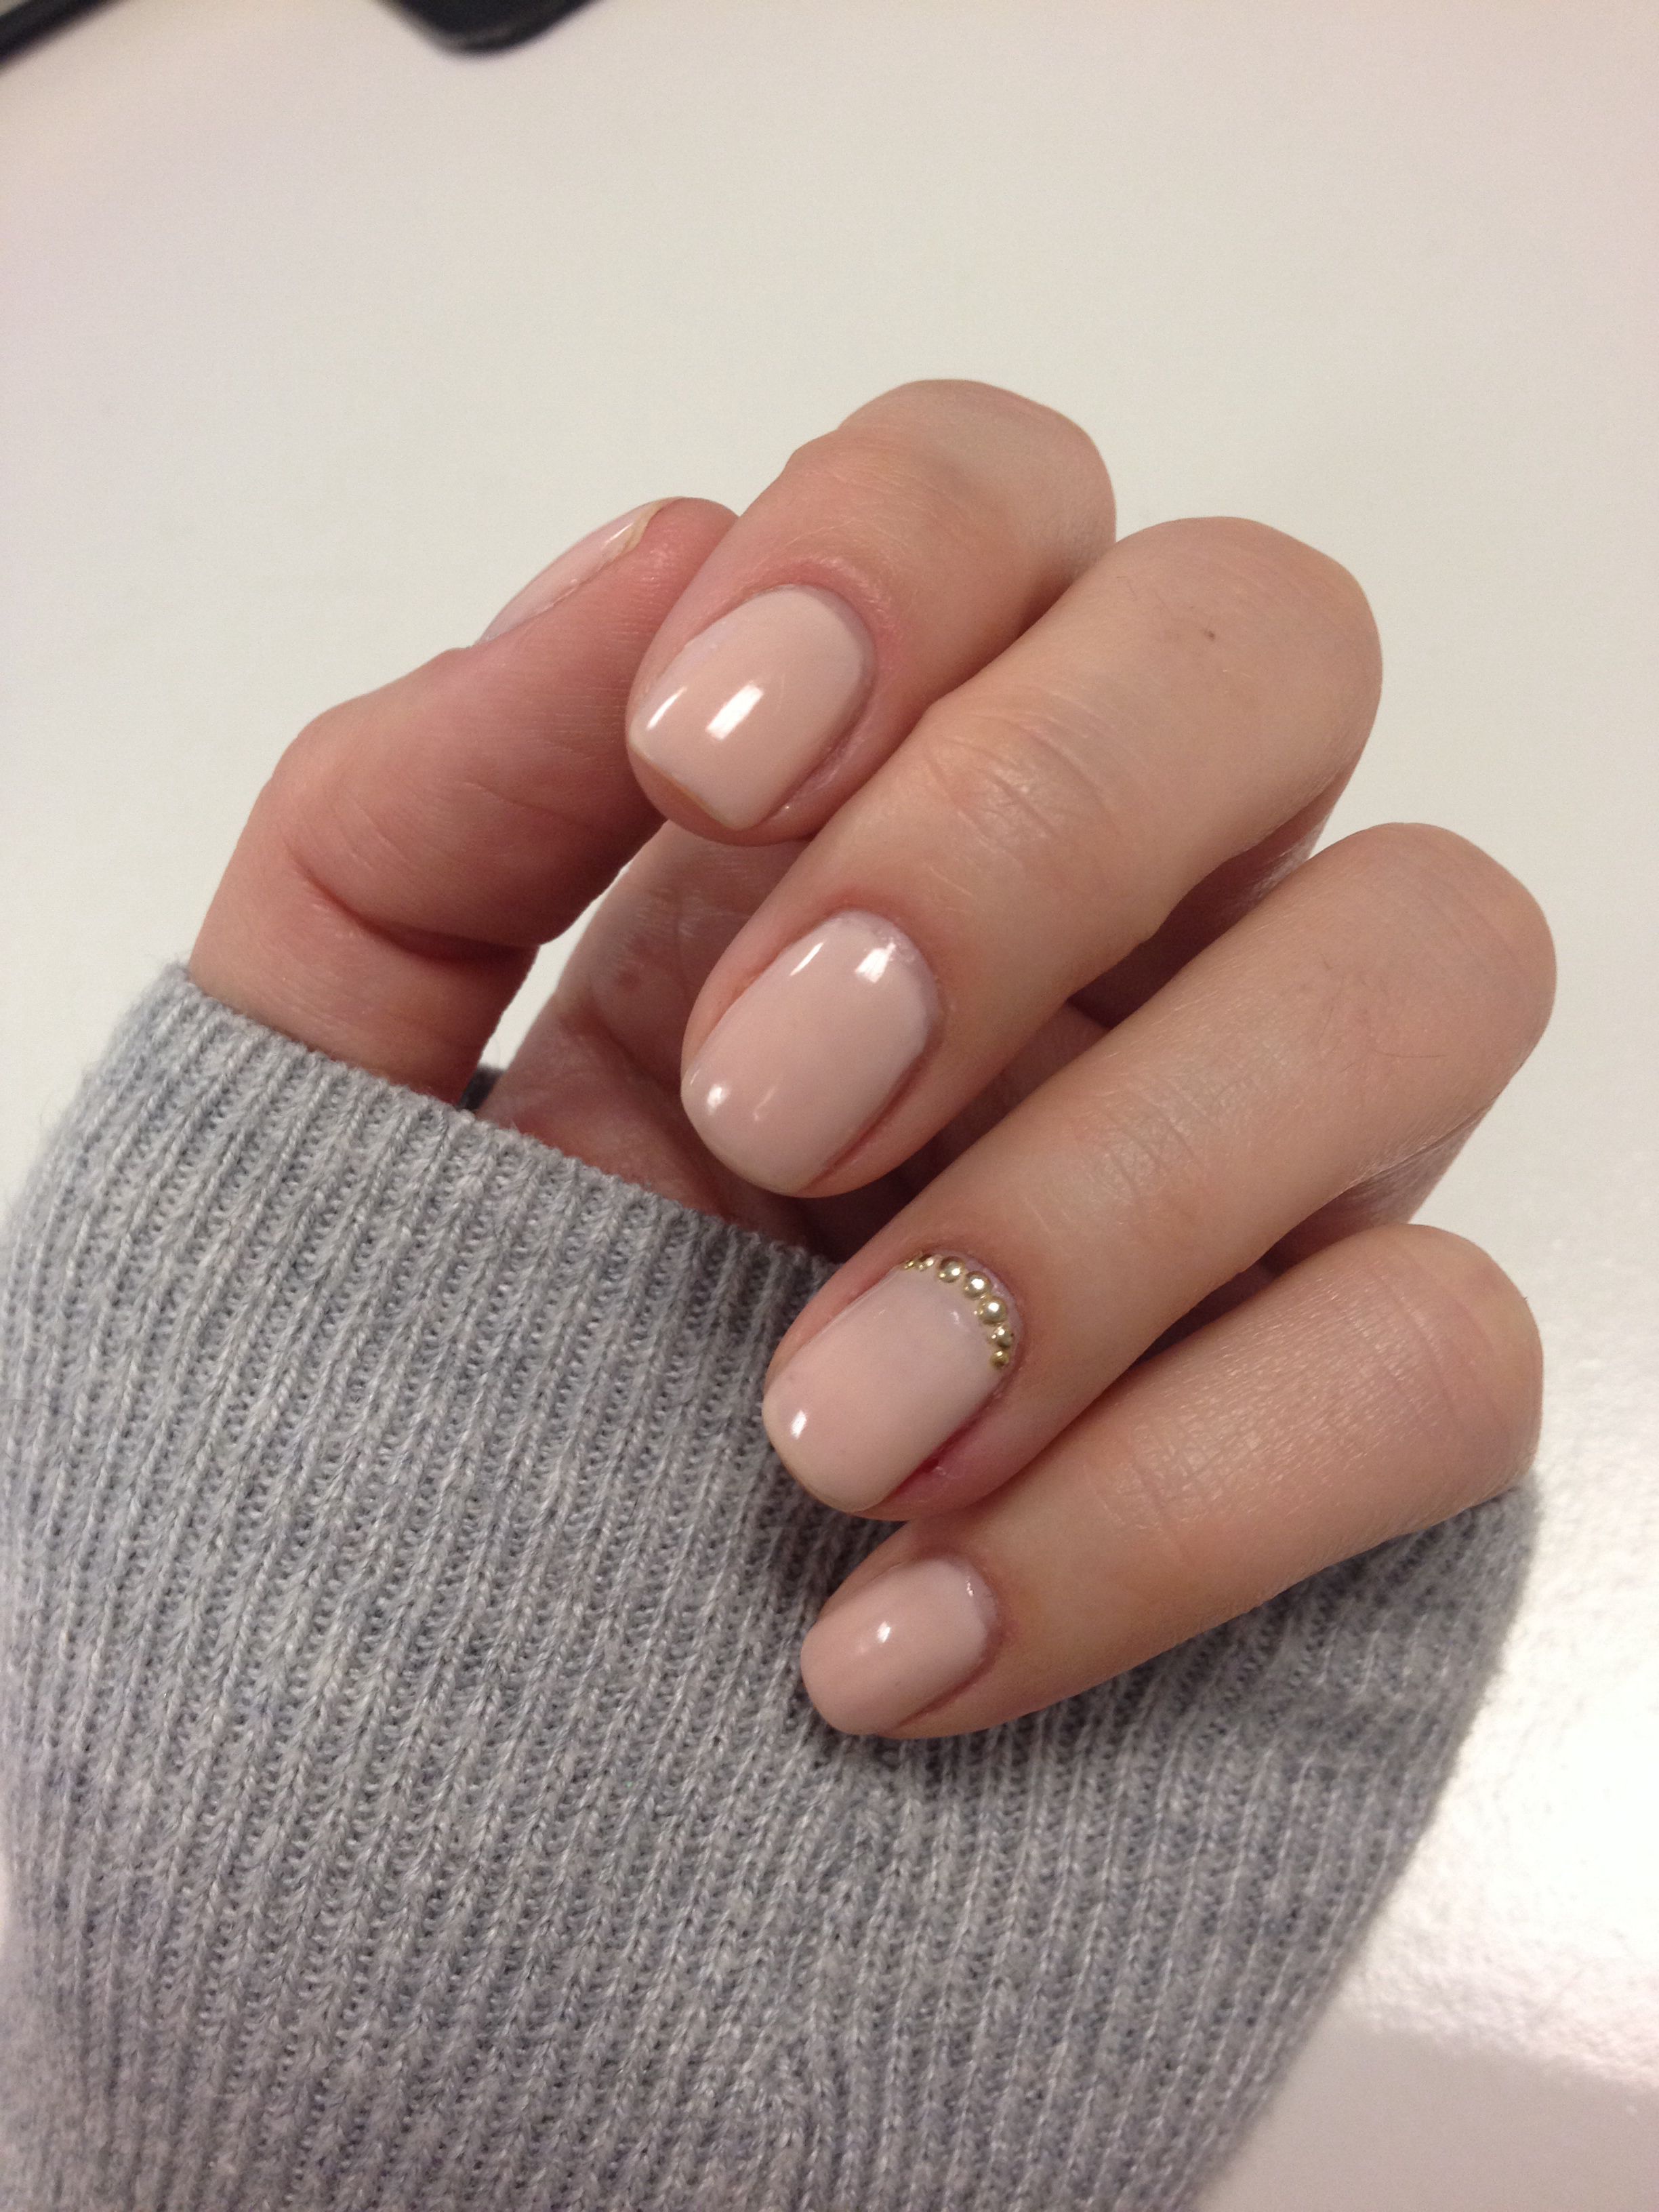 On my nails right now – CND Lavishly Loved. Excited to see how long it will last.